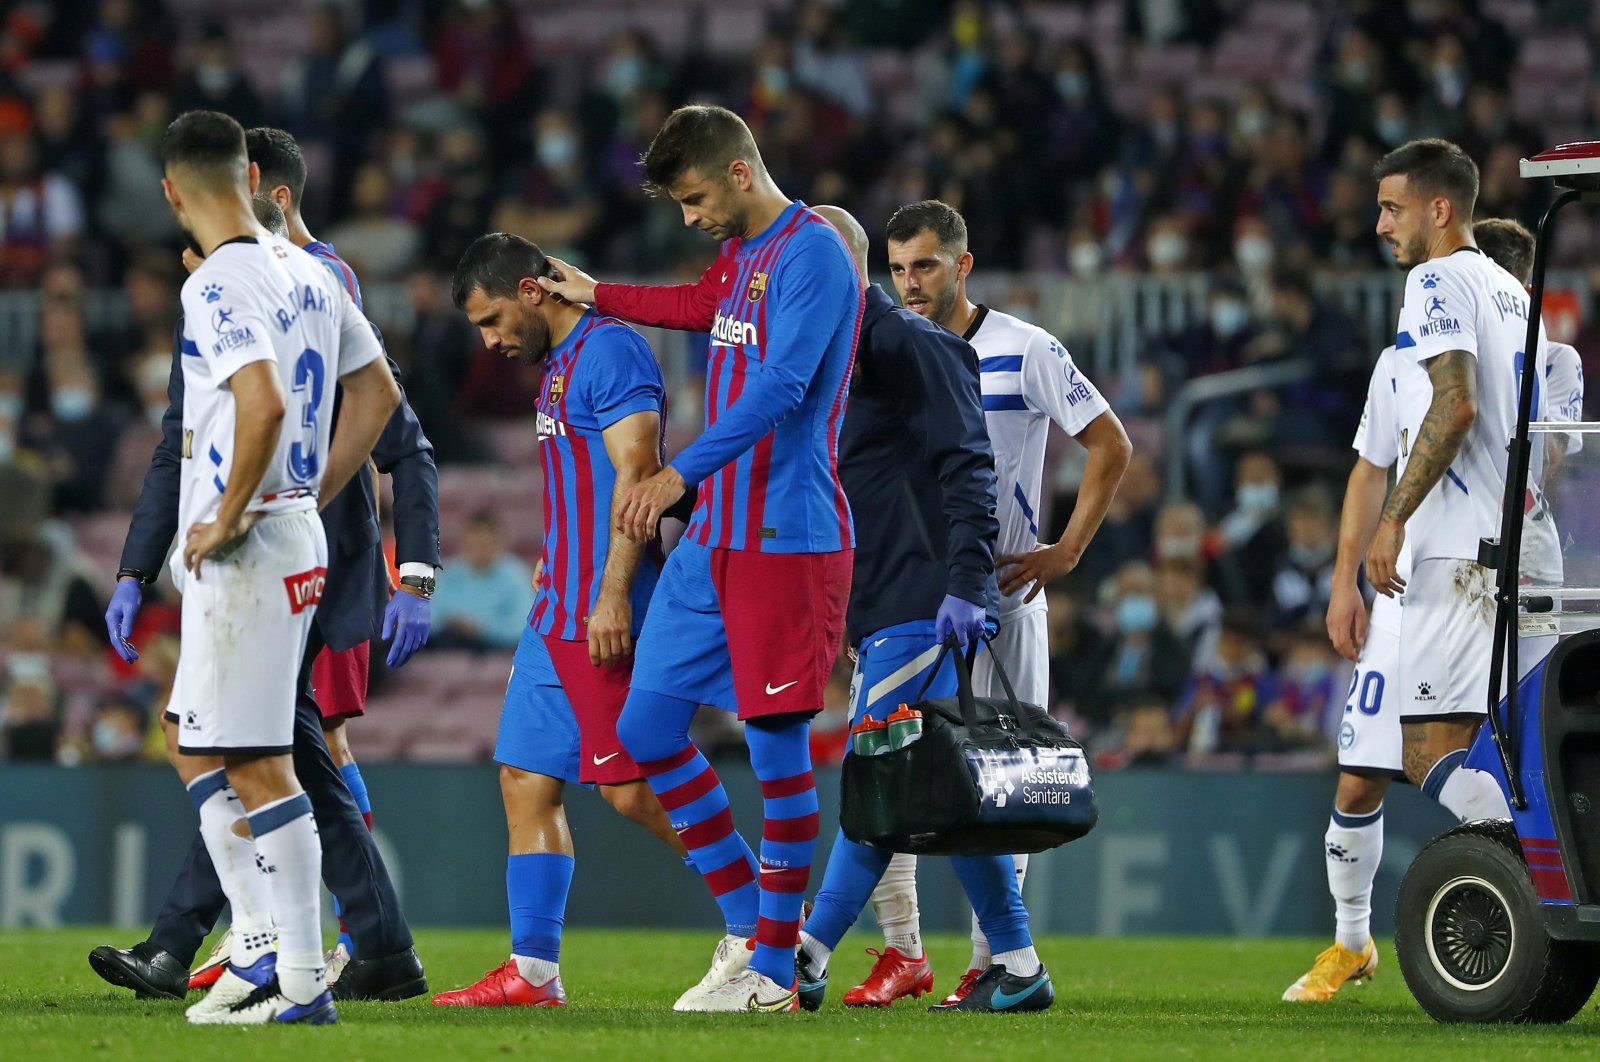 Barcelona&#039;s Sergio Aguero (2nd L) leaves the pitch injured during a La Liga match against Alaves at the Camp Nou, Barcelona, Spain, Oct. 30, 2021. (AP Photo)